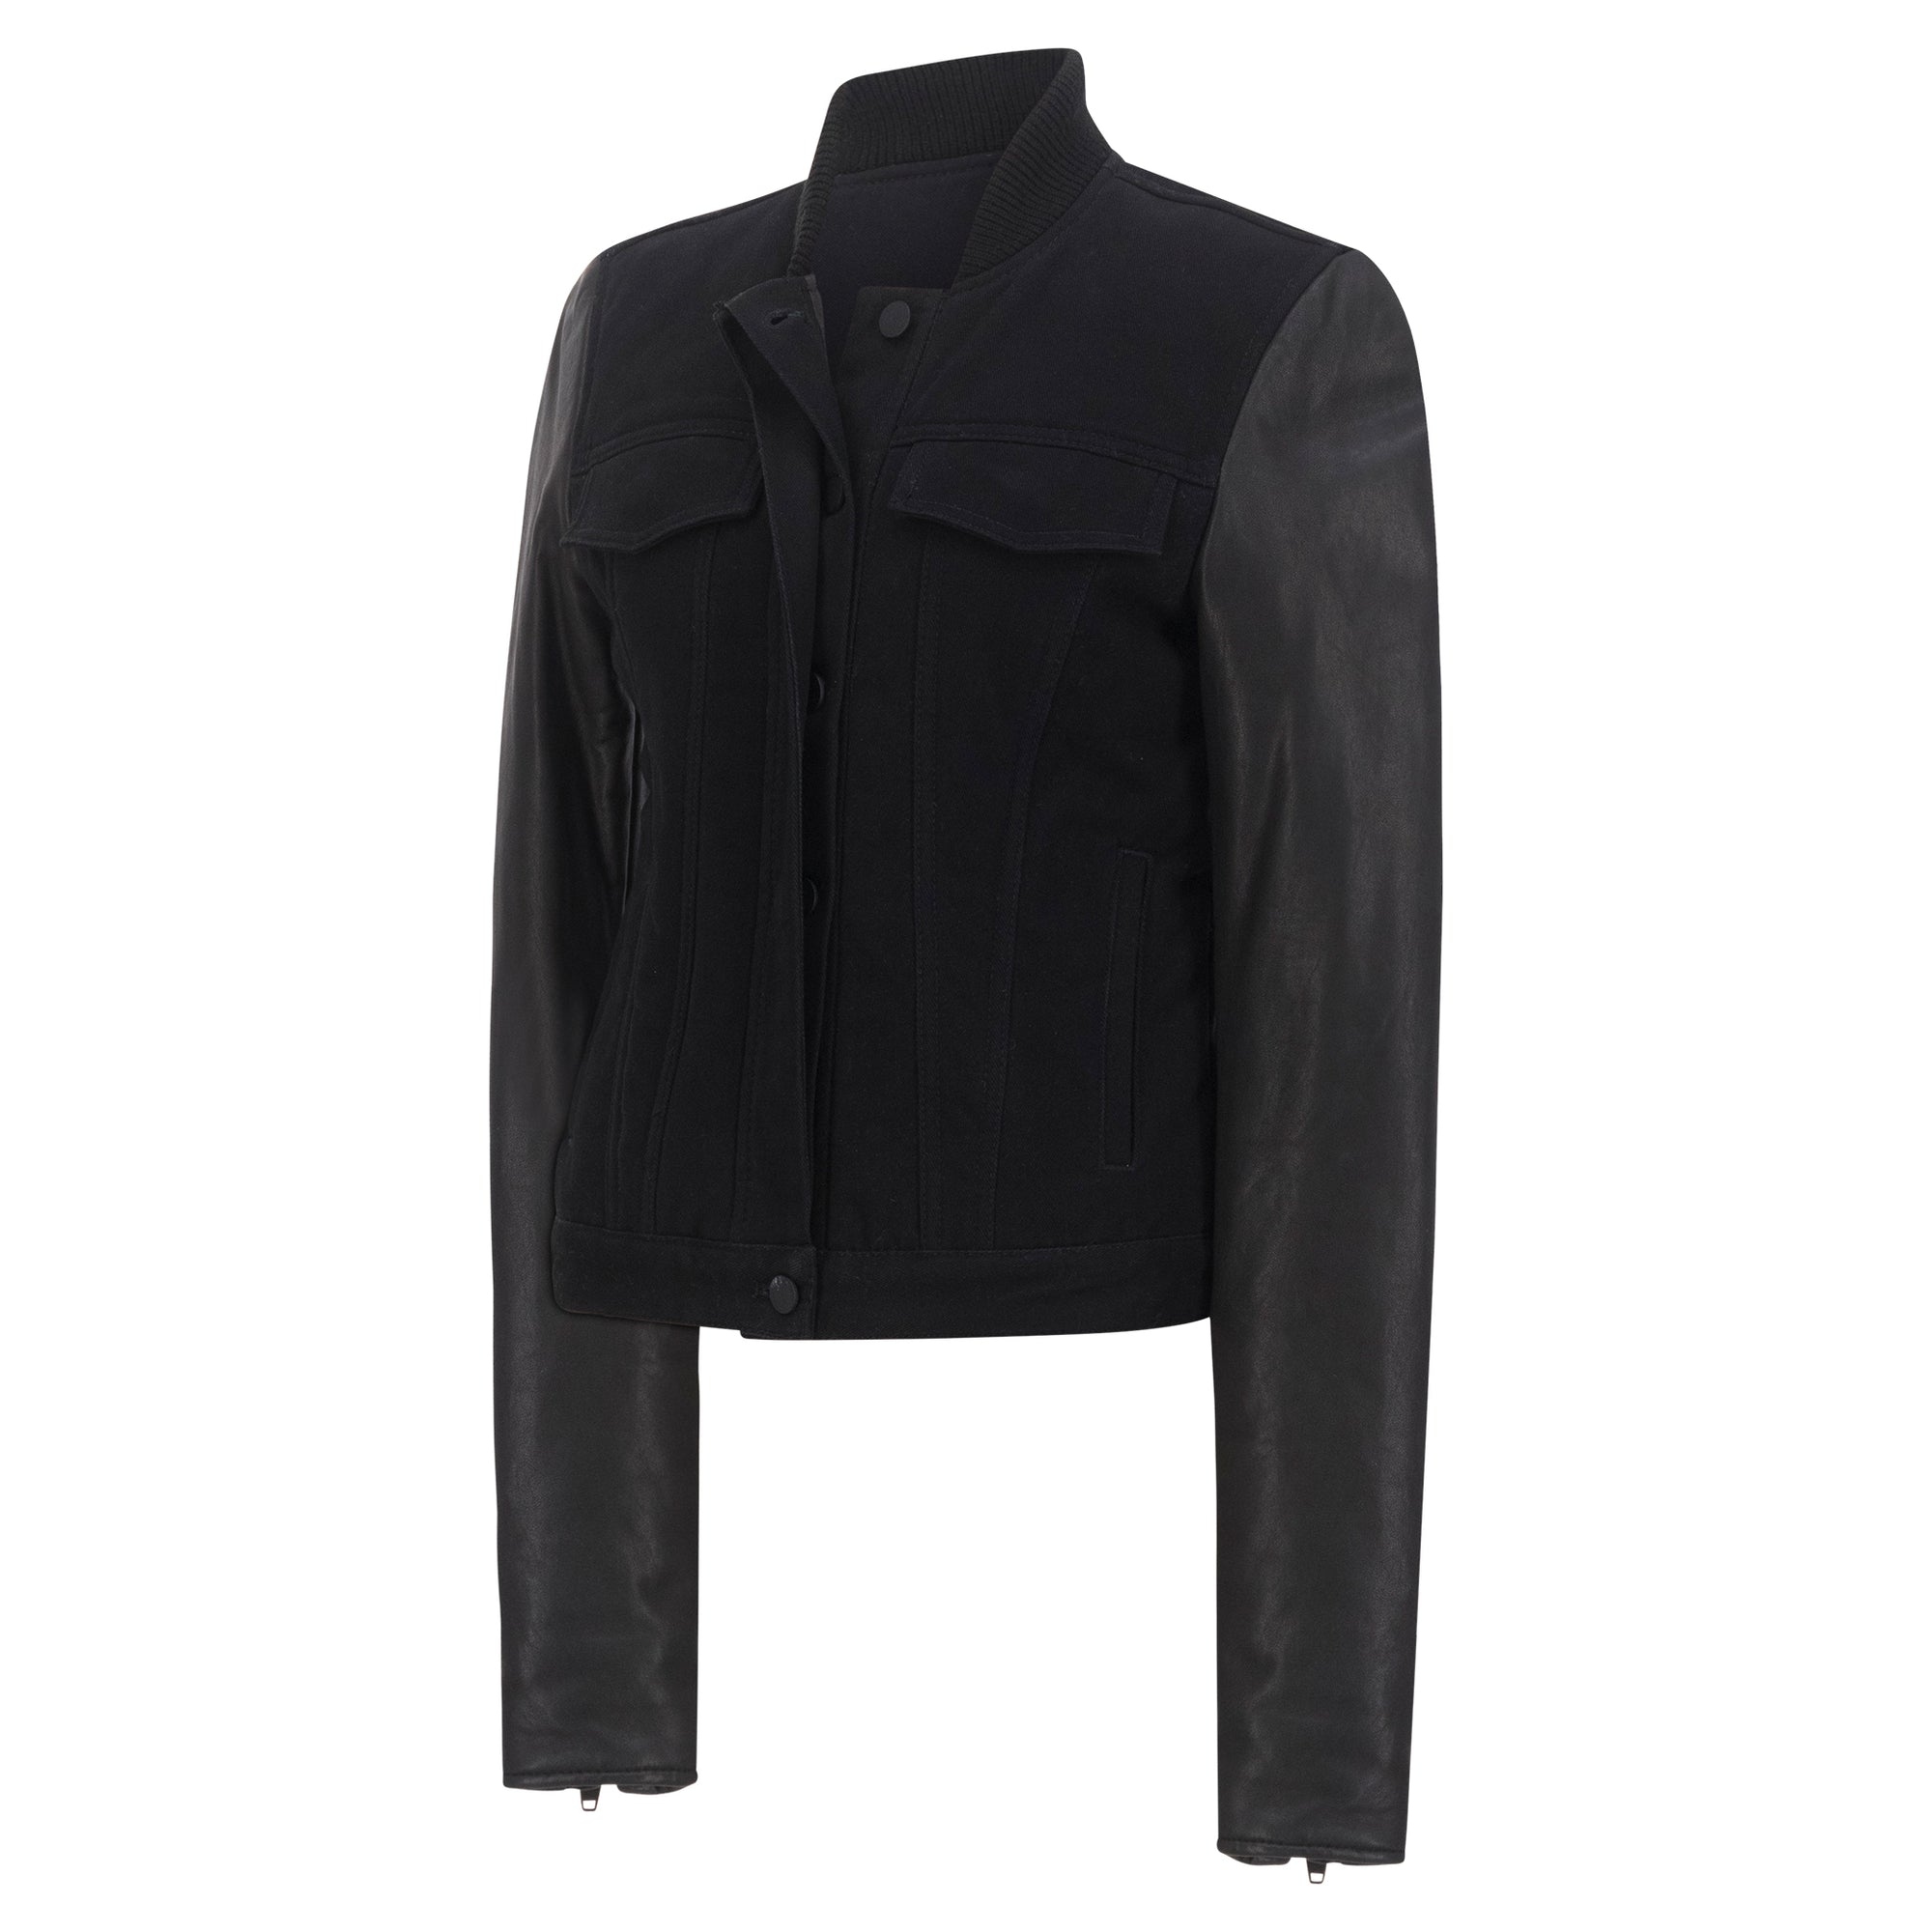 T by Alexander Wang Black Denim and Leather Varsity Bomber Jacket